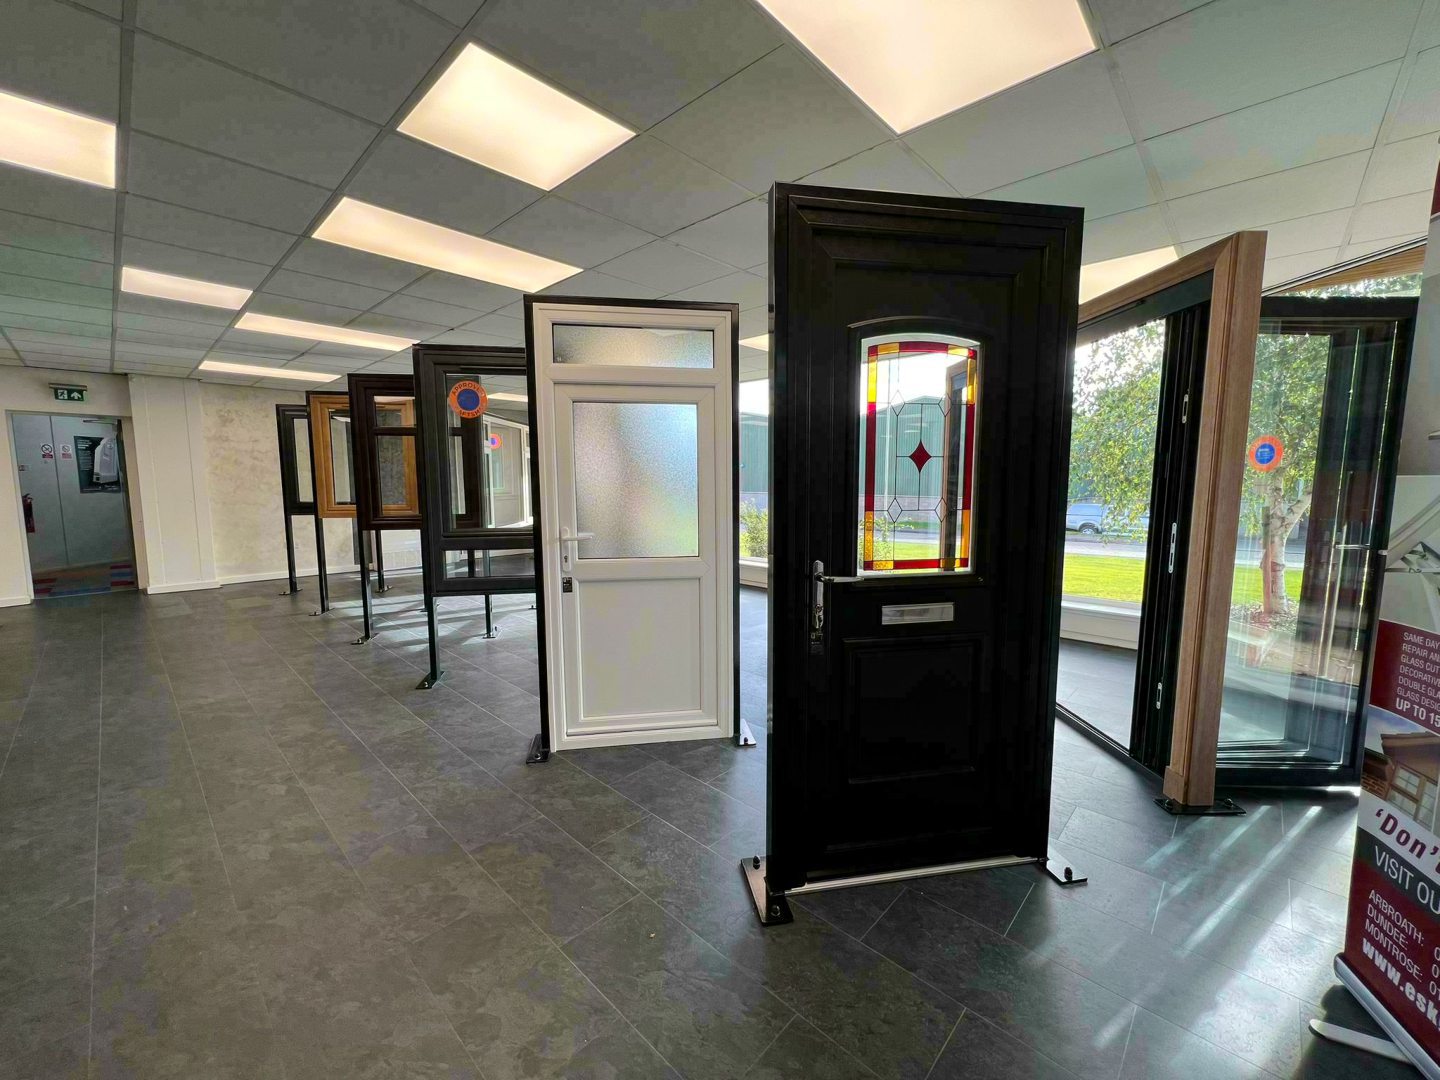 energy efficient windows and doors on display at Esk Glazing's showroom